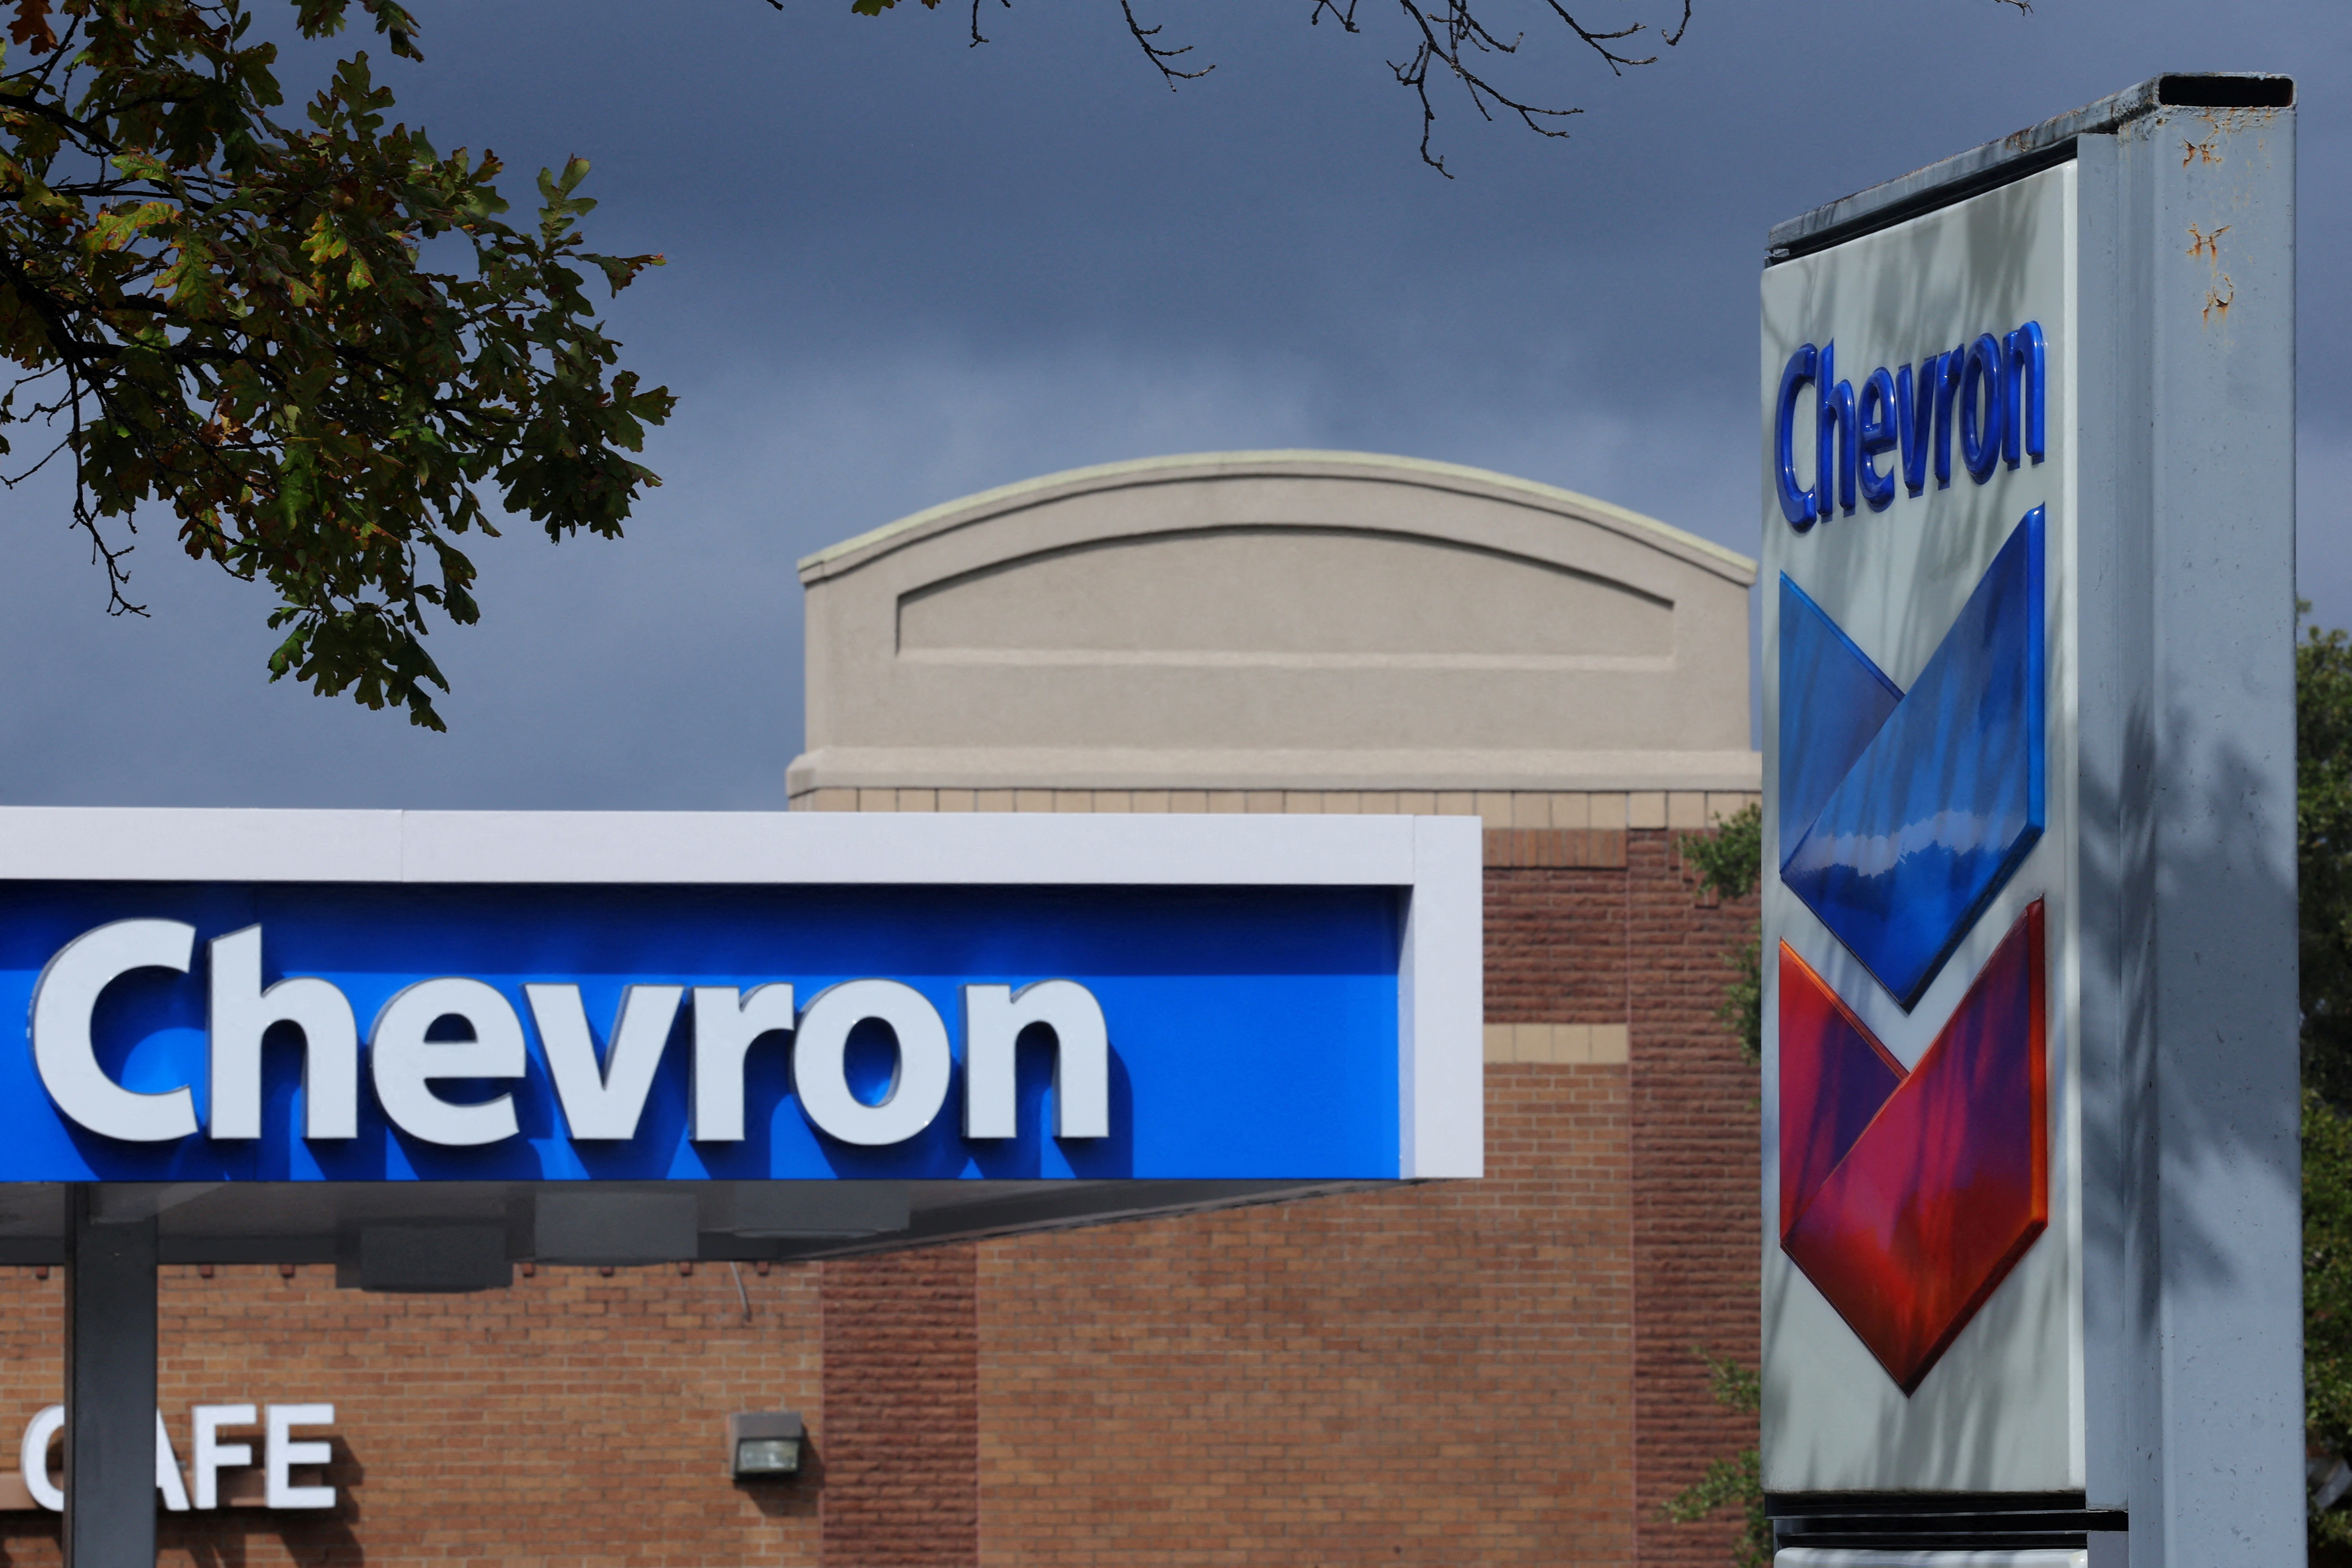 A Chevron gas station sign is seen in Austin